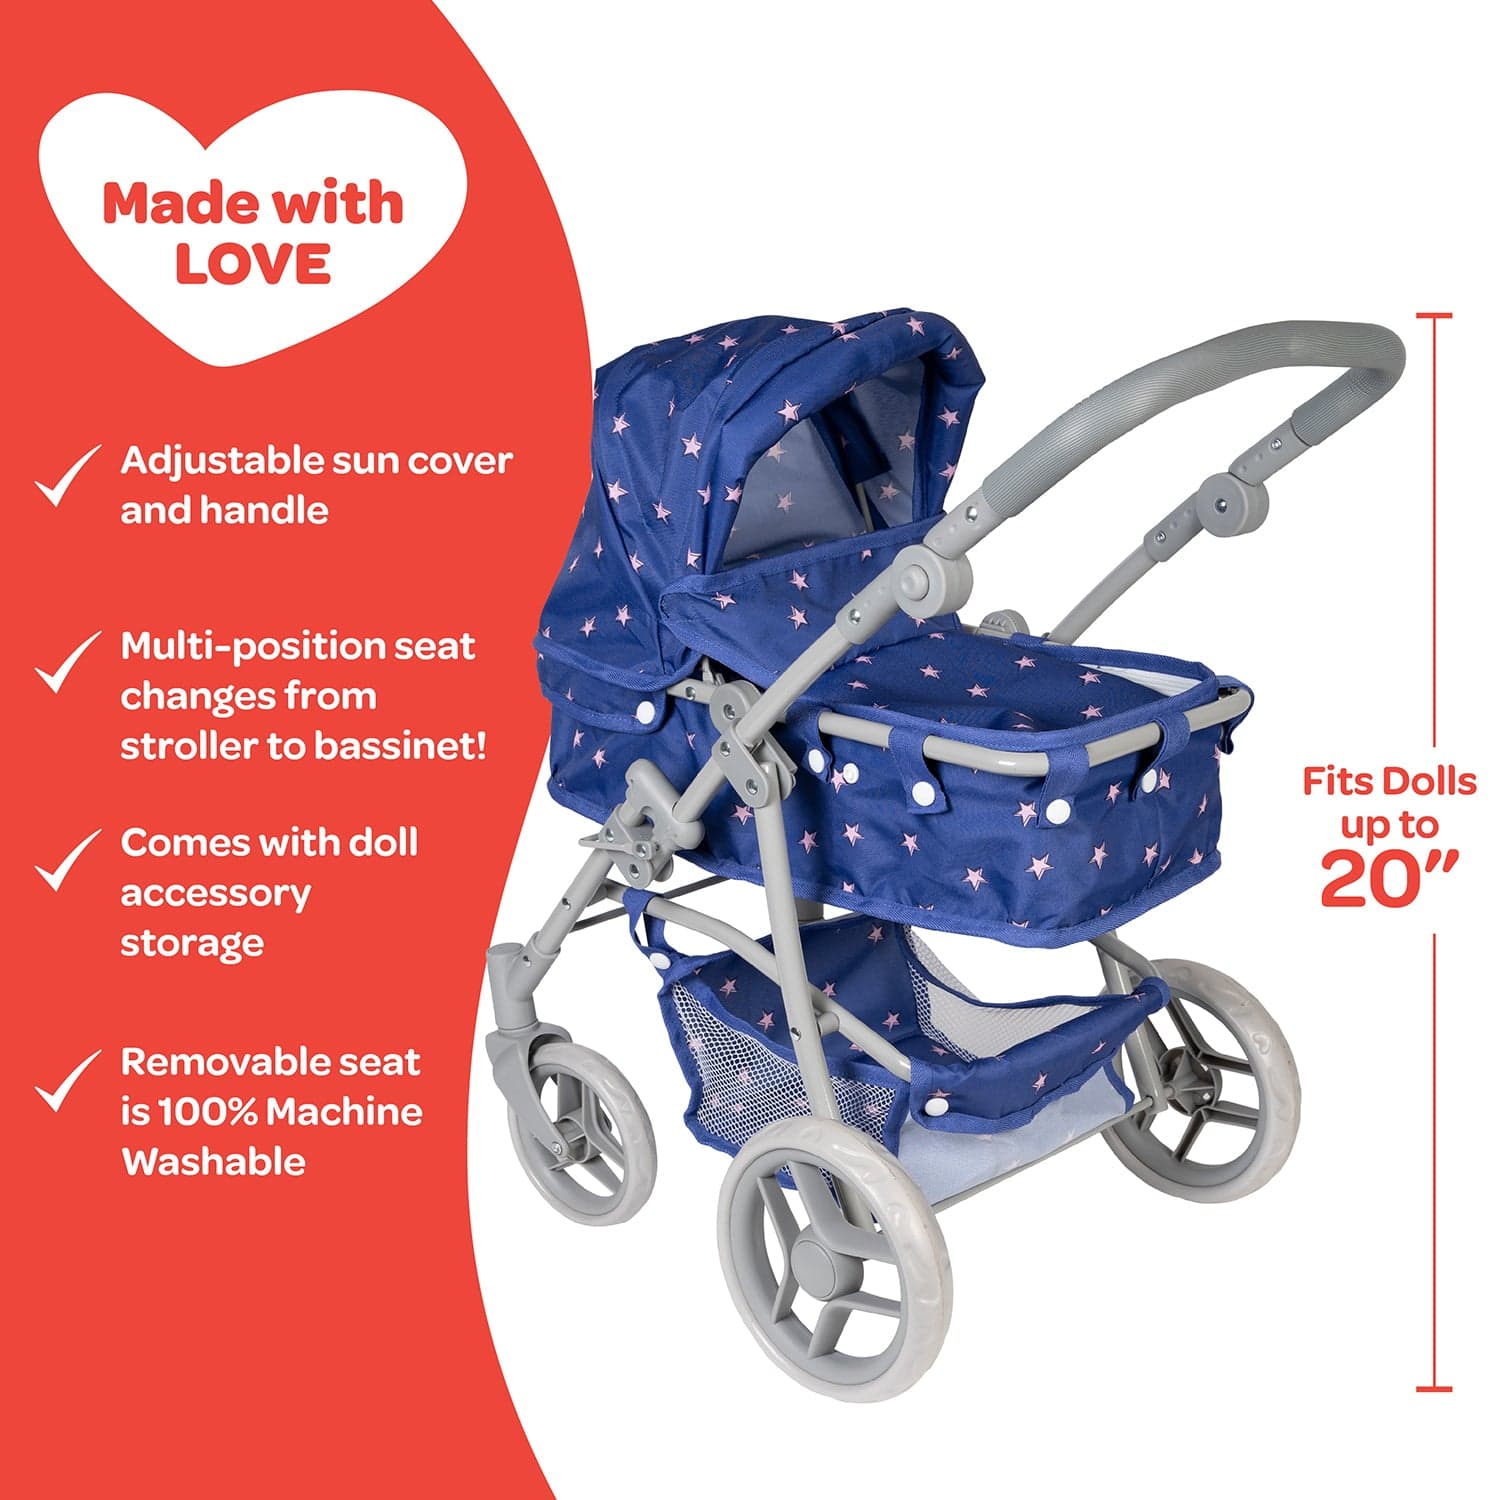 Adora 2-in-1 Convertible Baby Doll Stroller & Bassinet - Starry Night